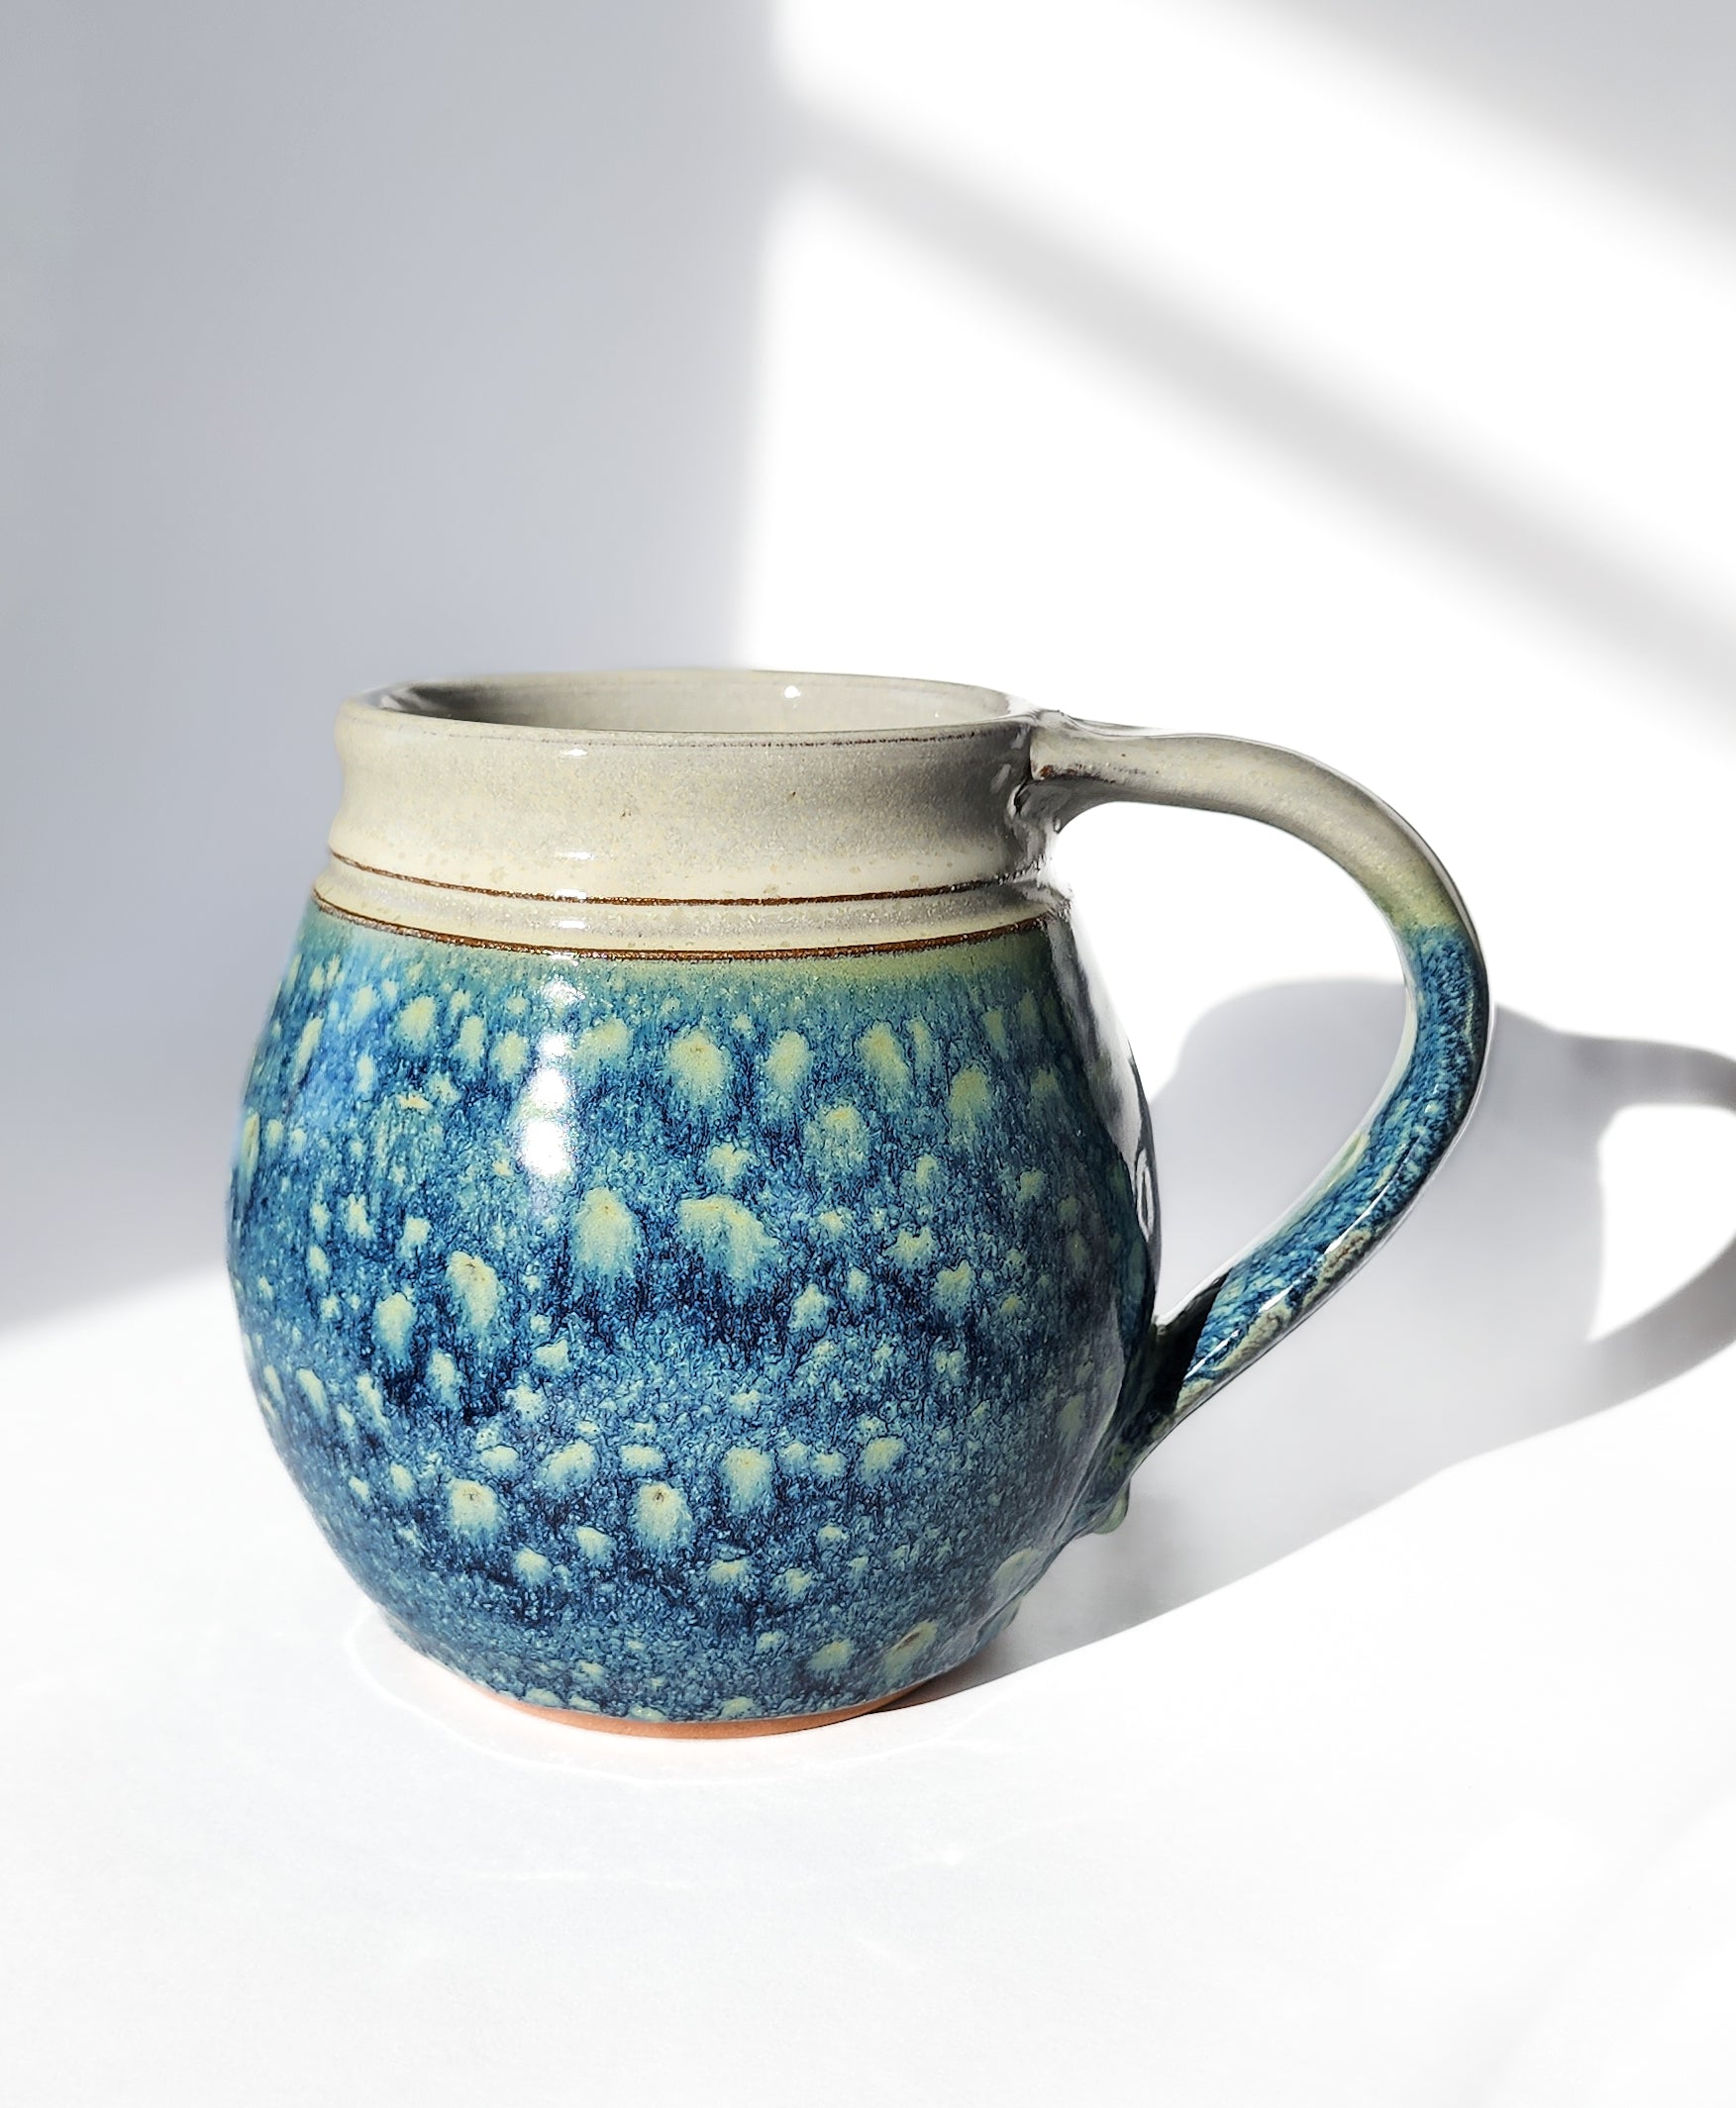 Image: Clinton Pottery's 30 oz Jumbo Mug in Starry Night – A celestial and generously sized addition to your kitchen, this machine washable mug seamlessly blends artistry with functionality. The captivating Starry Night color evokes the magic of the night sky, reminiscent of Van Gogh's swirling stars and cosmic wonder. Perfect for enjoying ample servings of your favorite coffee or tea with a touch of celestial elegance.